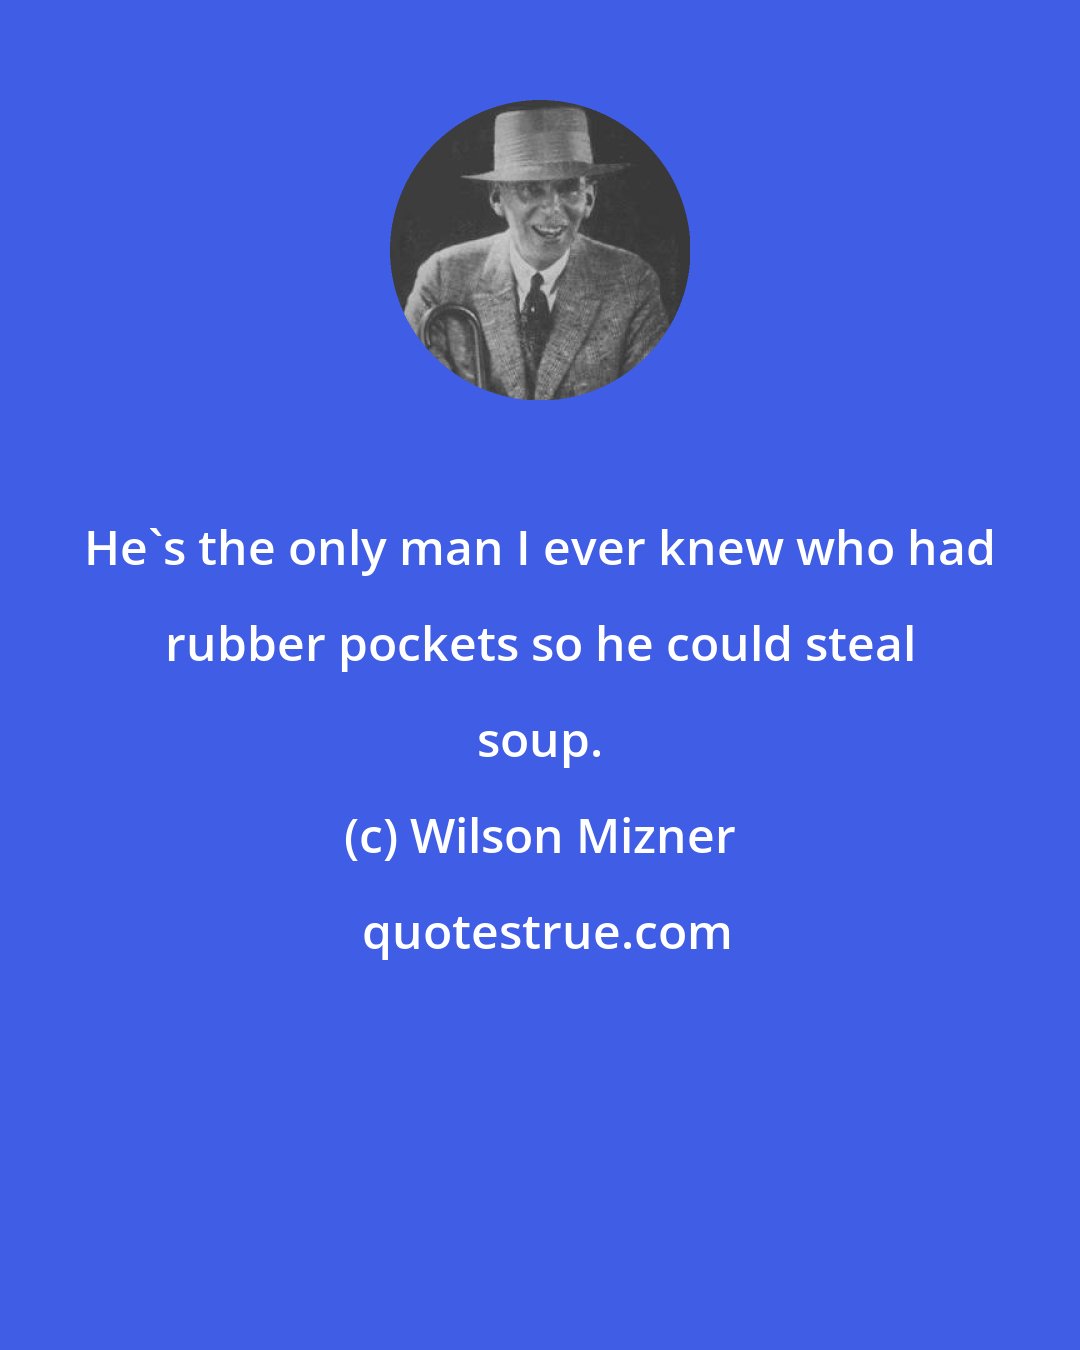 Wilson Mizner: He's the only man I ever knew who had rubber pockets so he could steal soup.